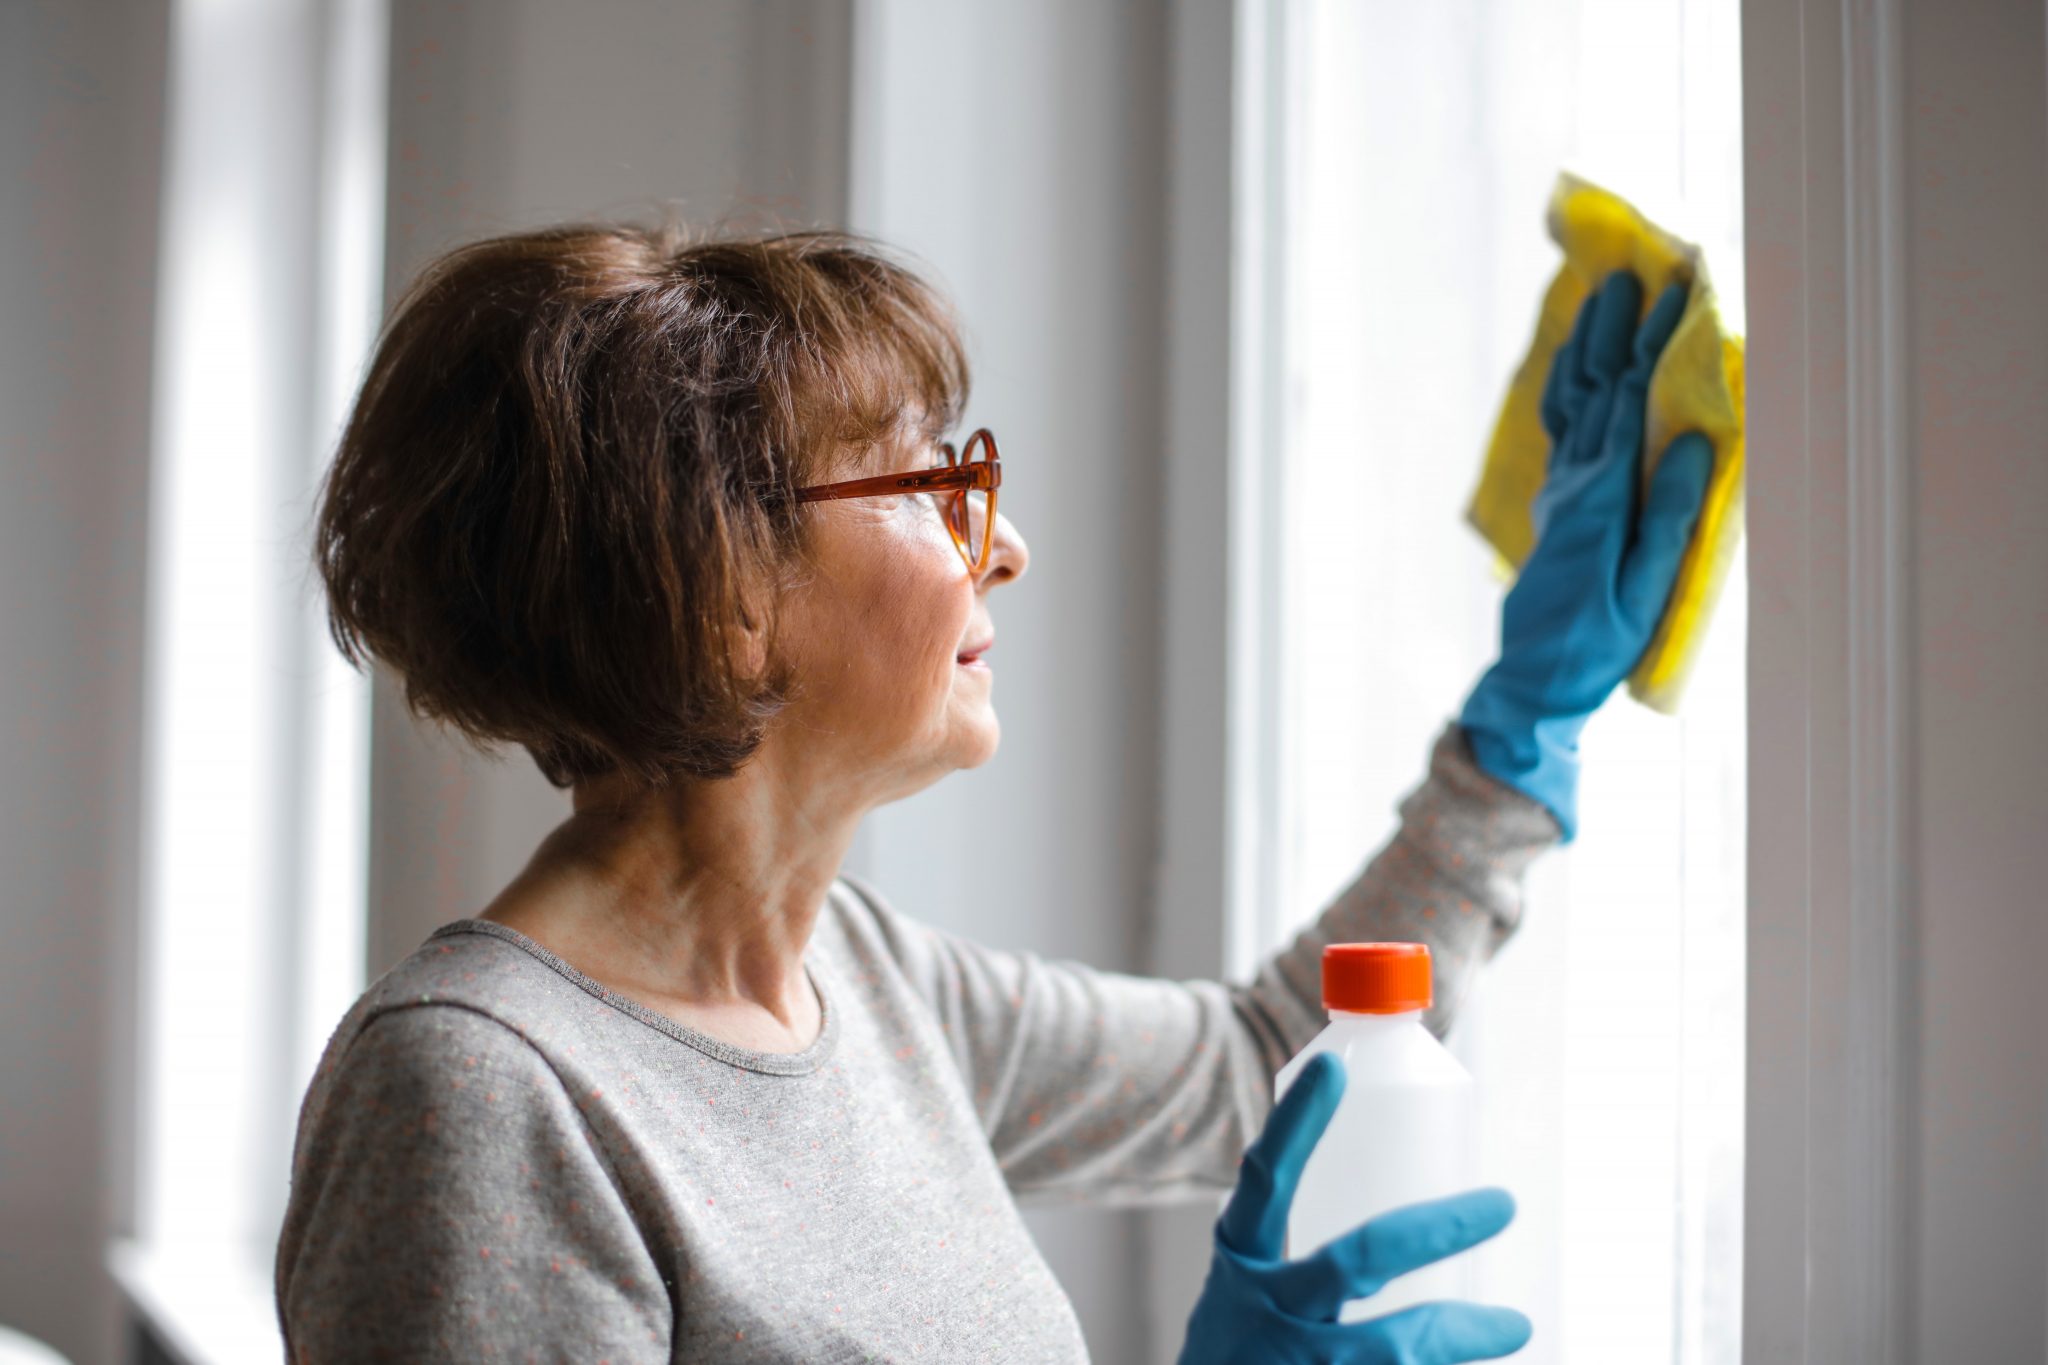 Blitz Cleaning service for those who need home care in London